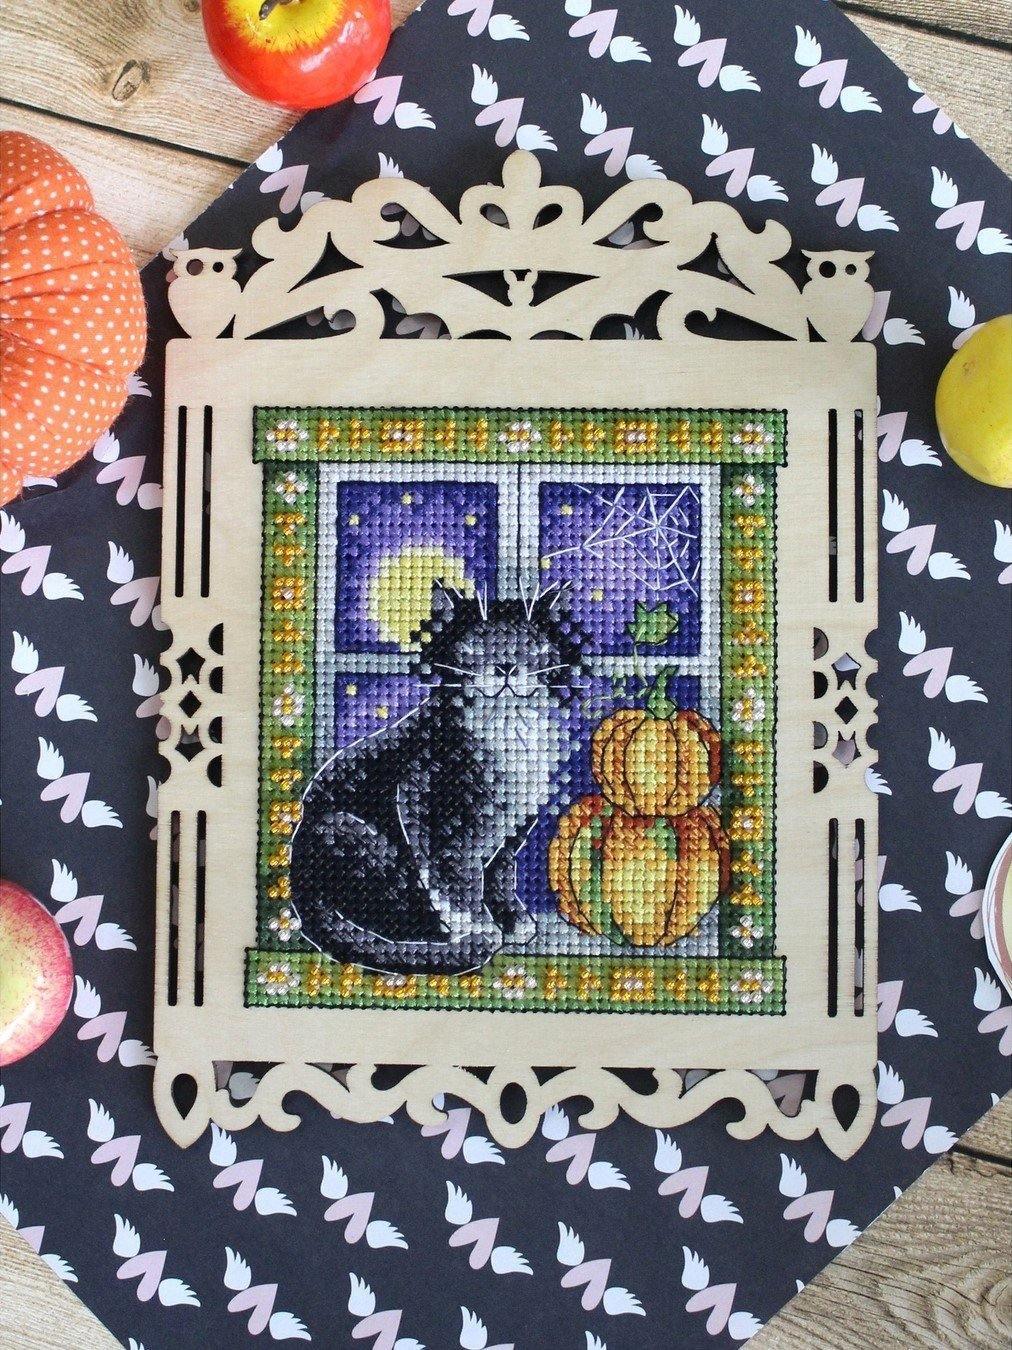 Cross-Stitching Symbols and Superstitions: The Meaning of Imagery in Cross-Stitching - Wizardi